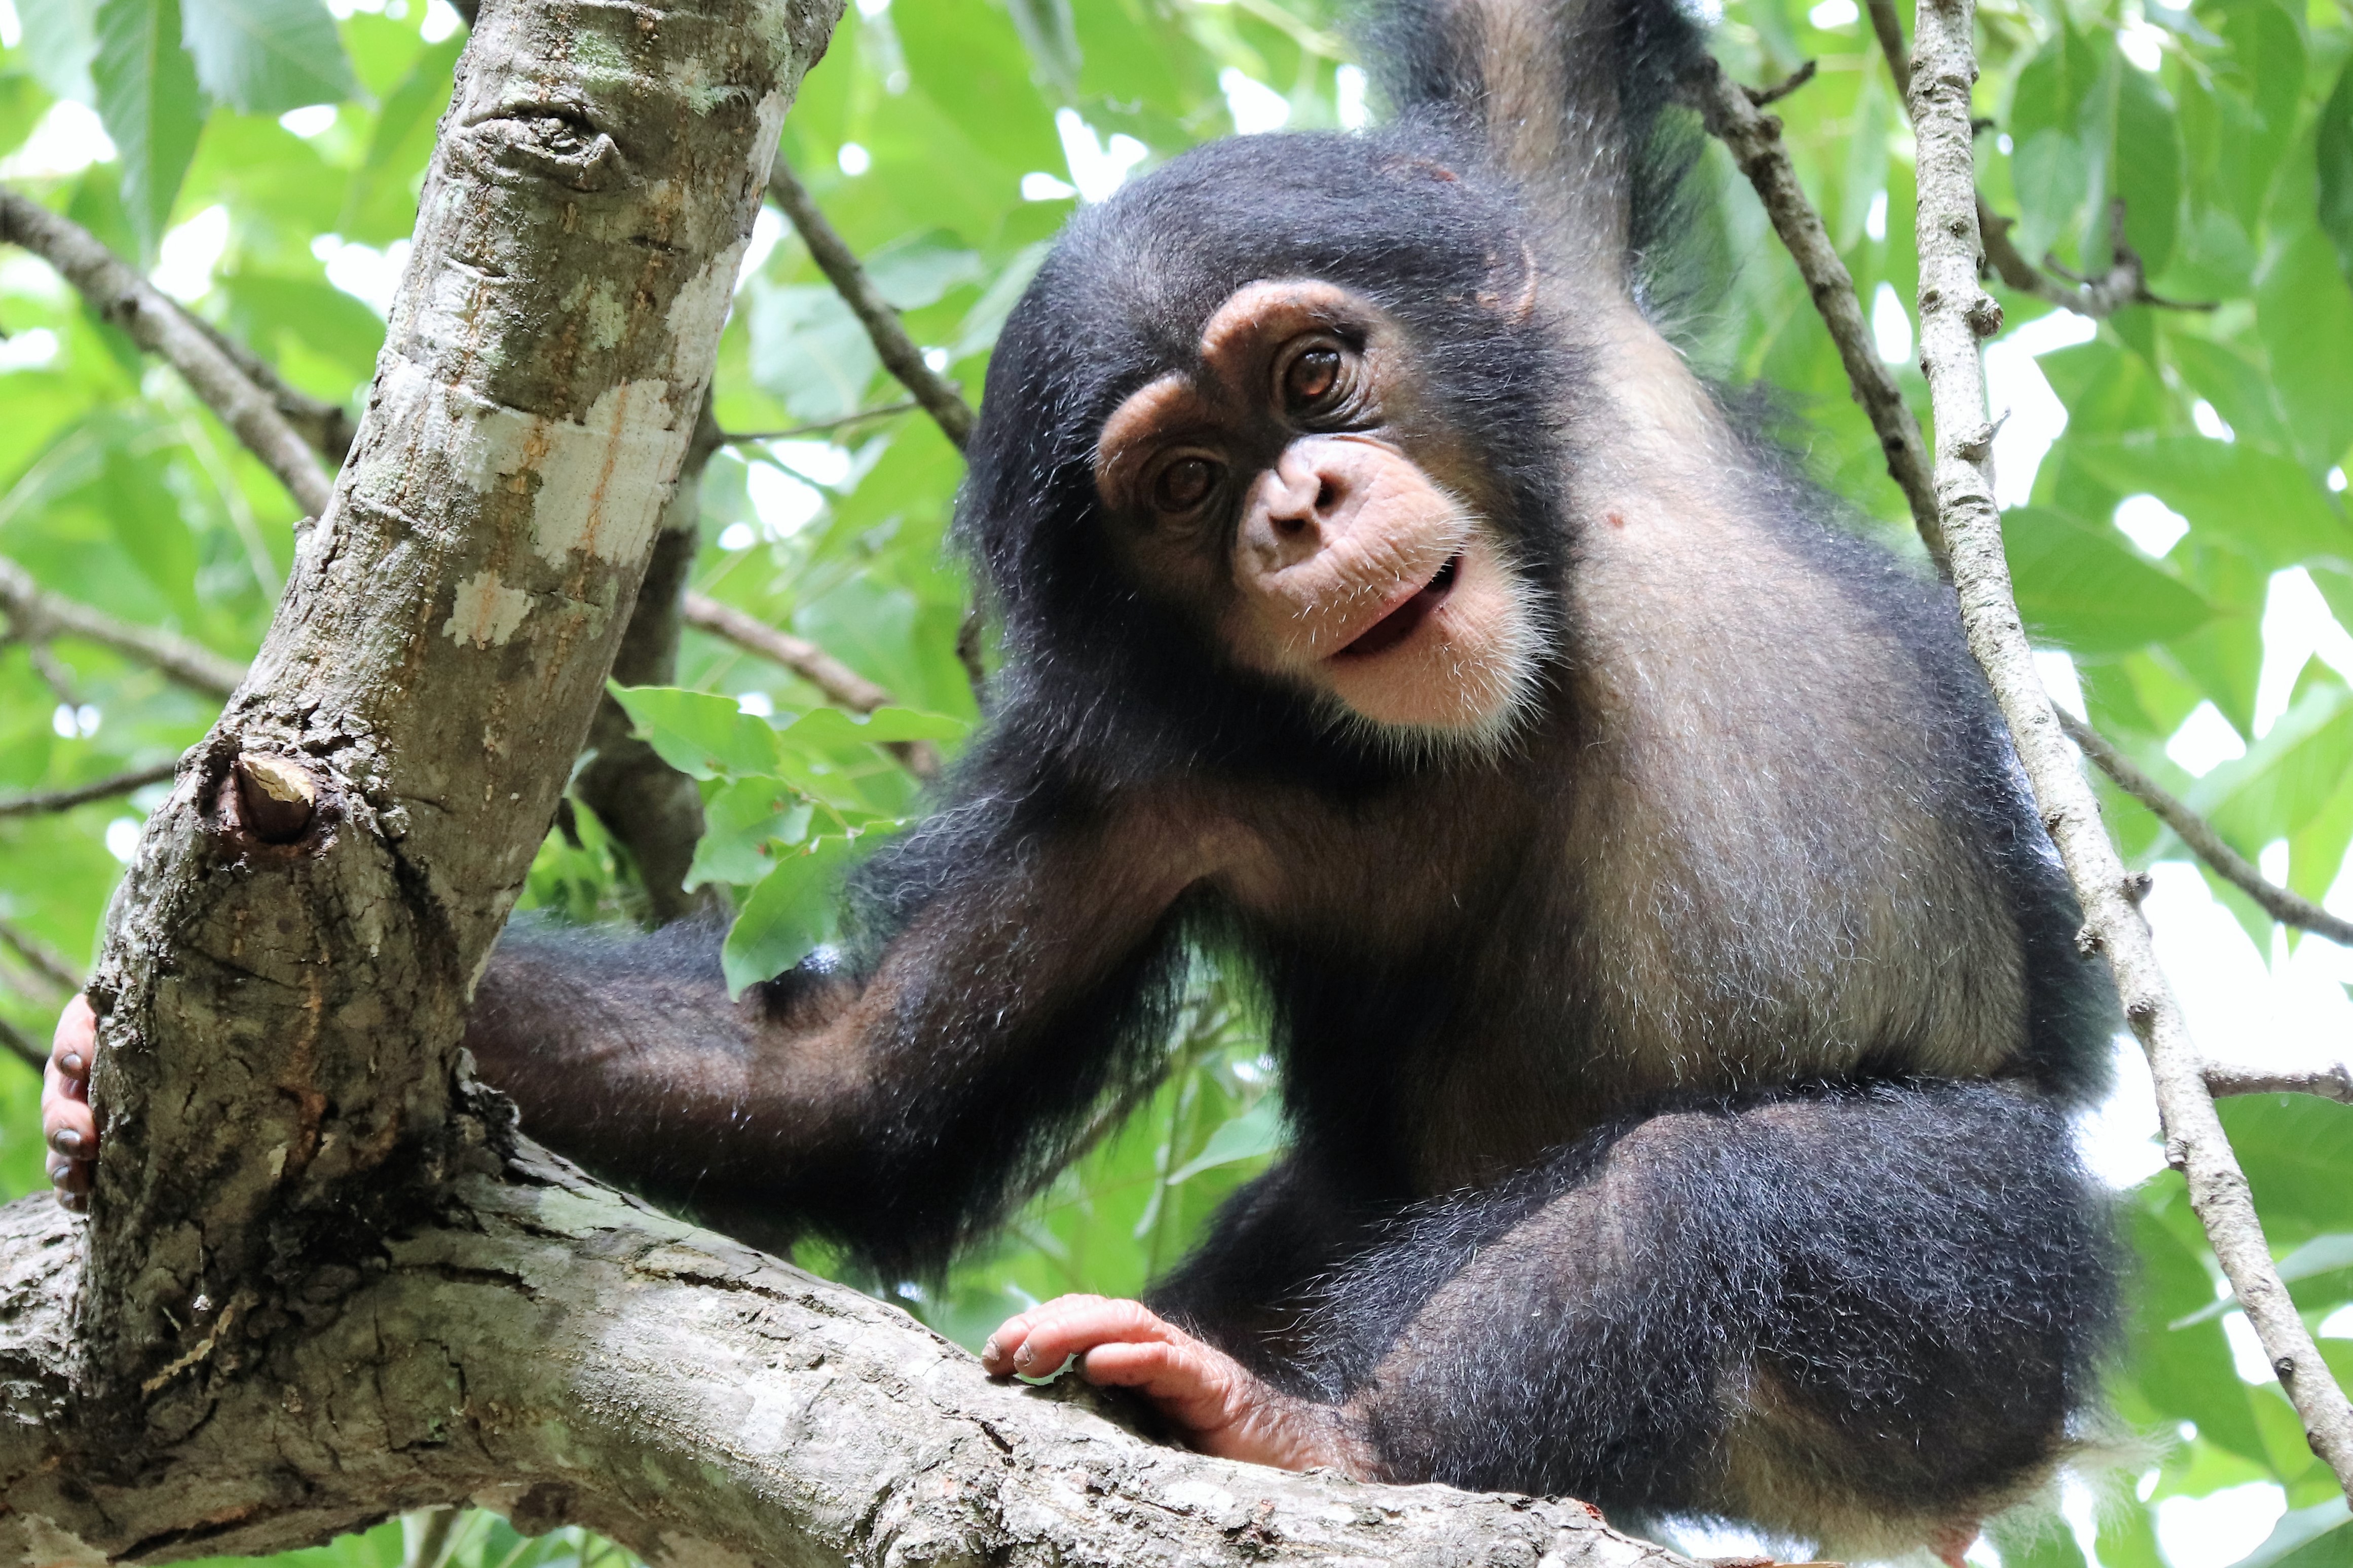 Tita was rescued from the pet trade and is learning how to be wild at PASA member sanctuary Chimpanzee Conservation Center in Guinea.